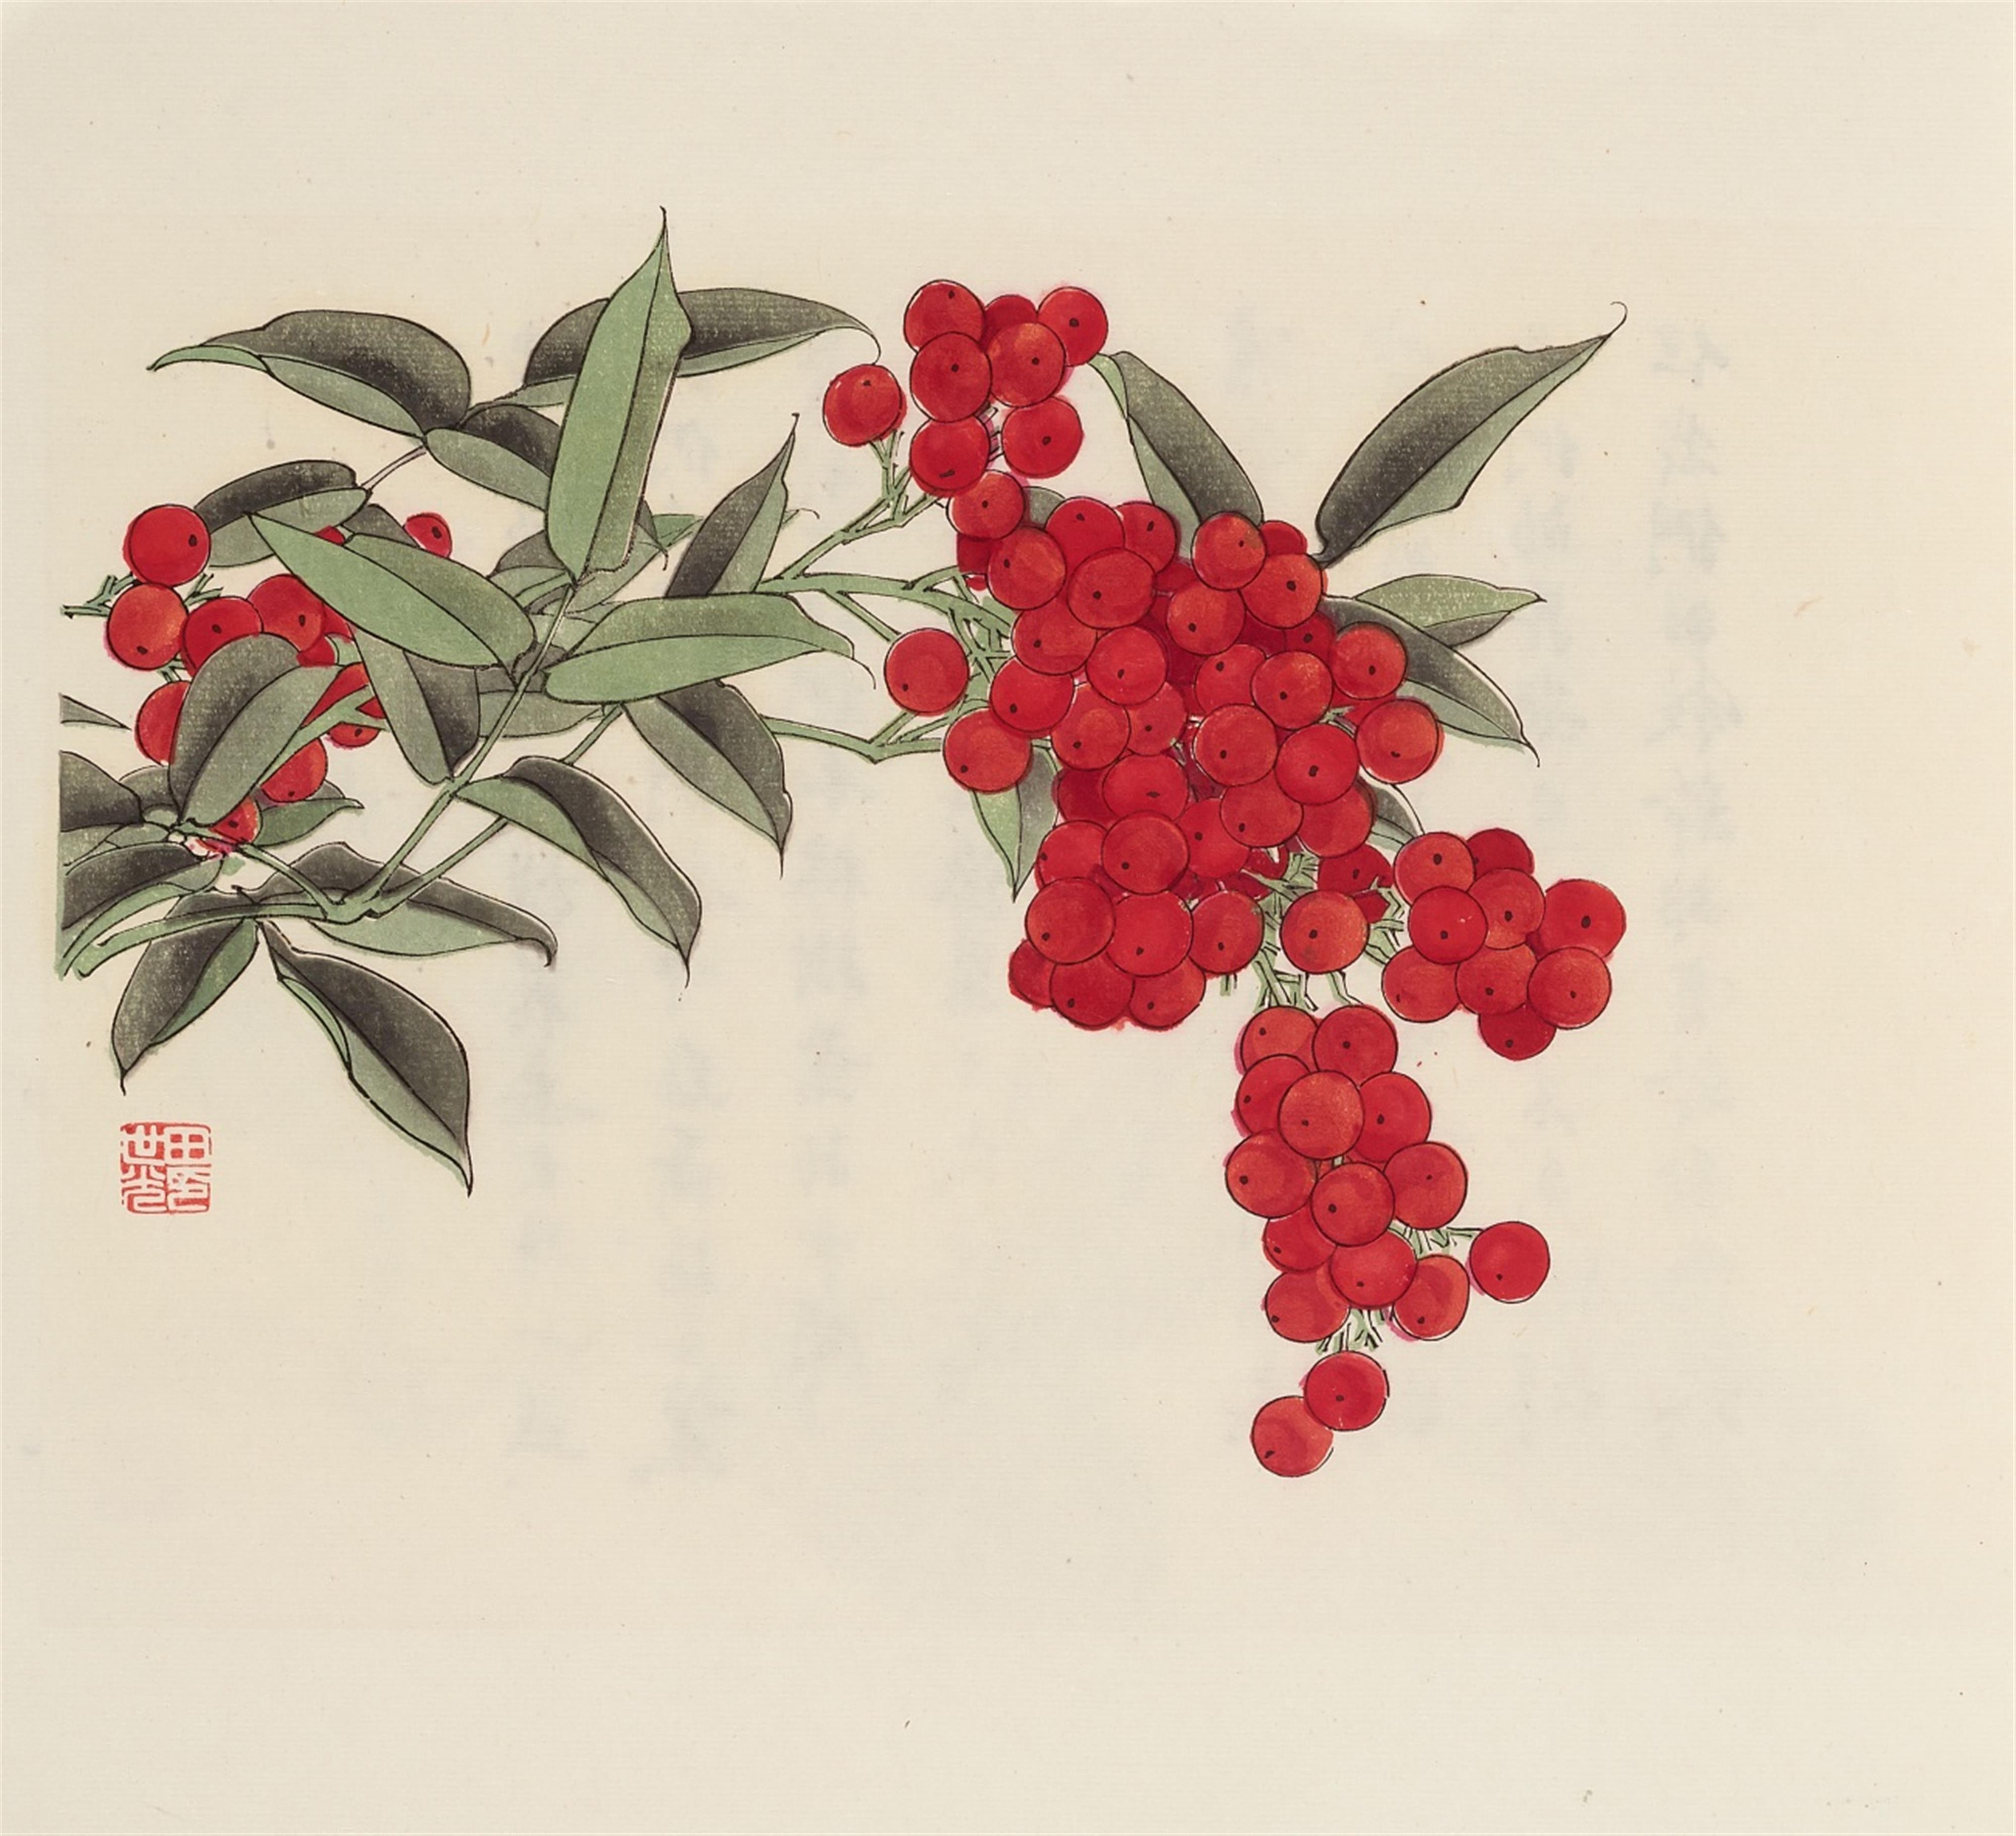 Yu Feian, attributed to
Tian Shiguang and Yu Zhizhen (1915-1995) - One volume of ten titled "Baihua qifang" (A hundred flowers blossom) with ten colour woodblock prints. Rongbaozhai, Beijing 1960, 6th month. - image-1